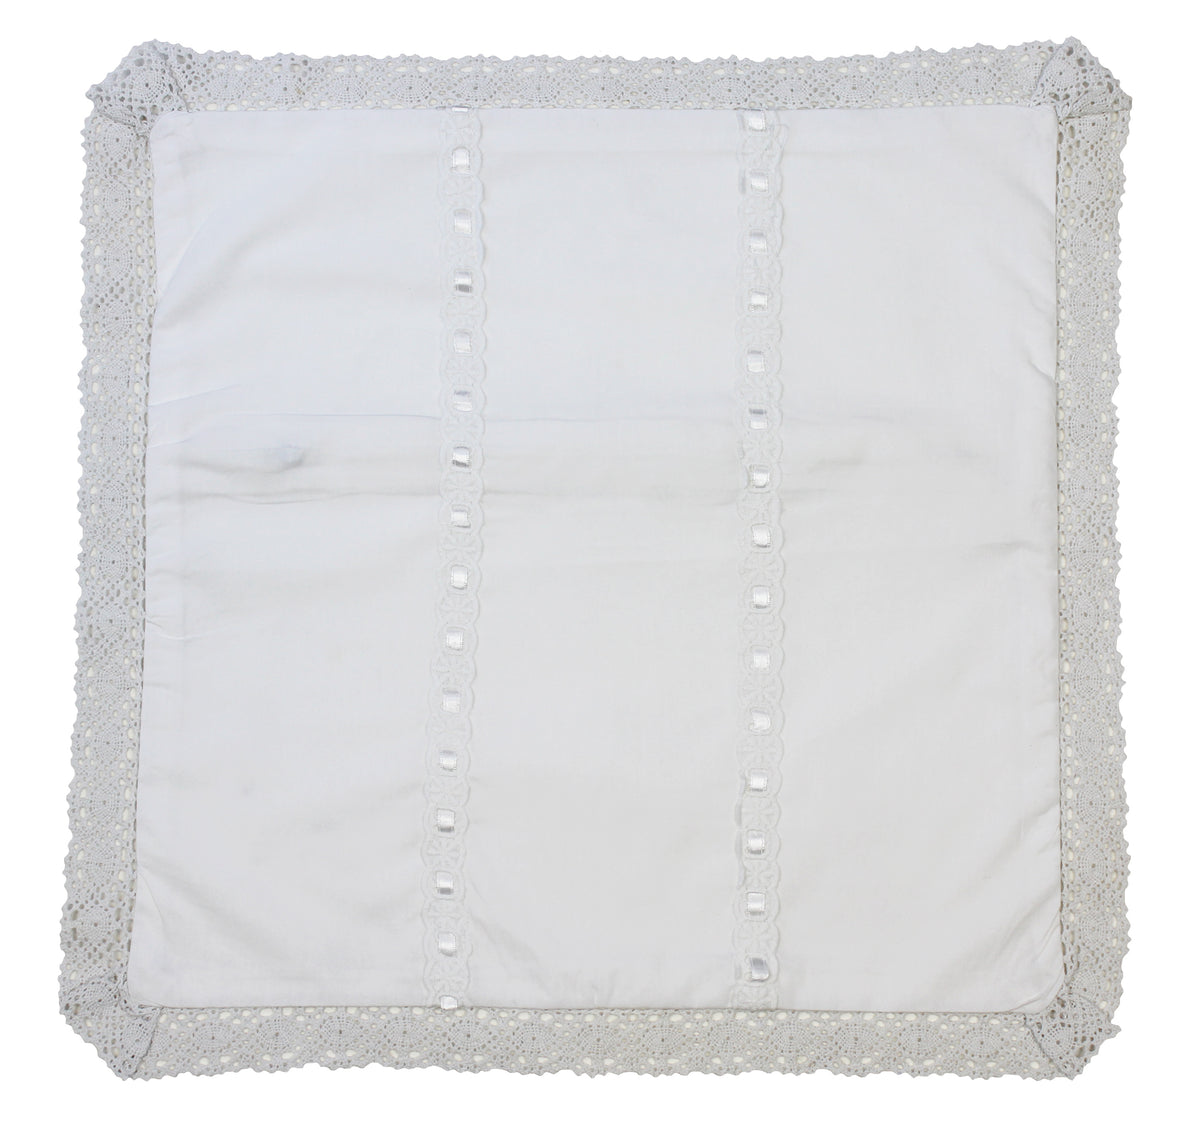 White Cushion Cover With Cotton Lace Trim